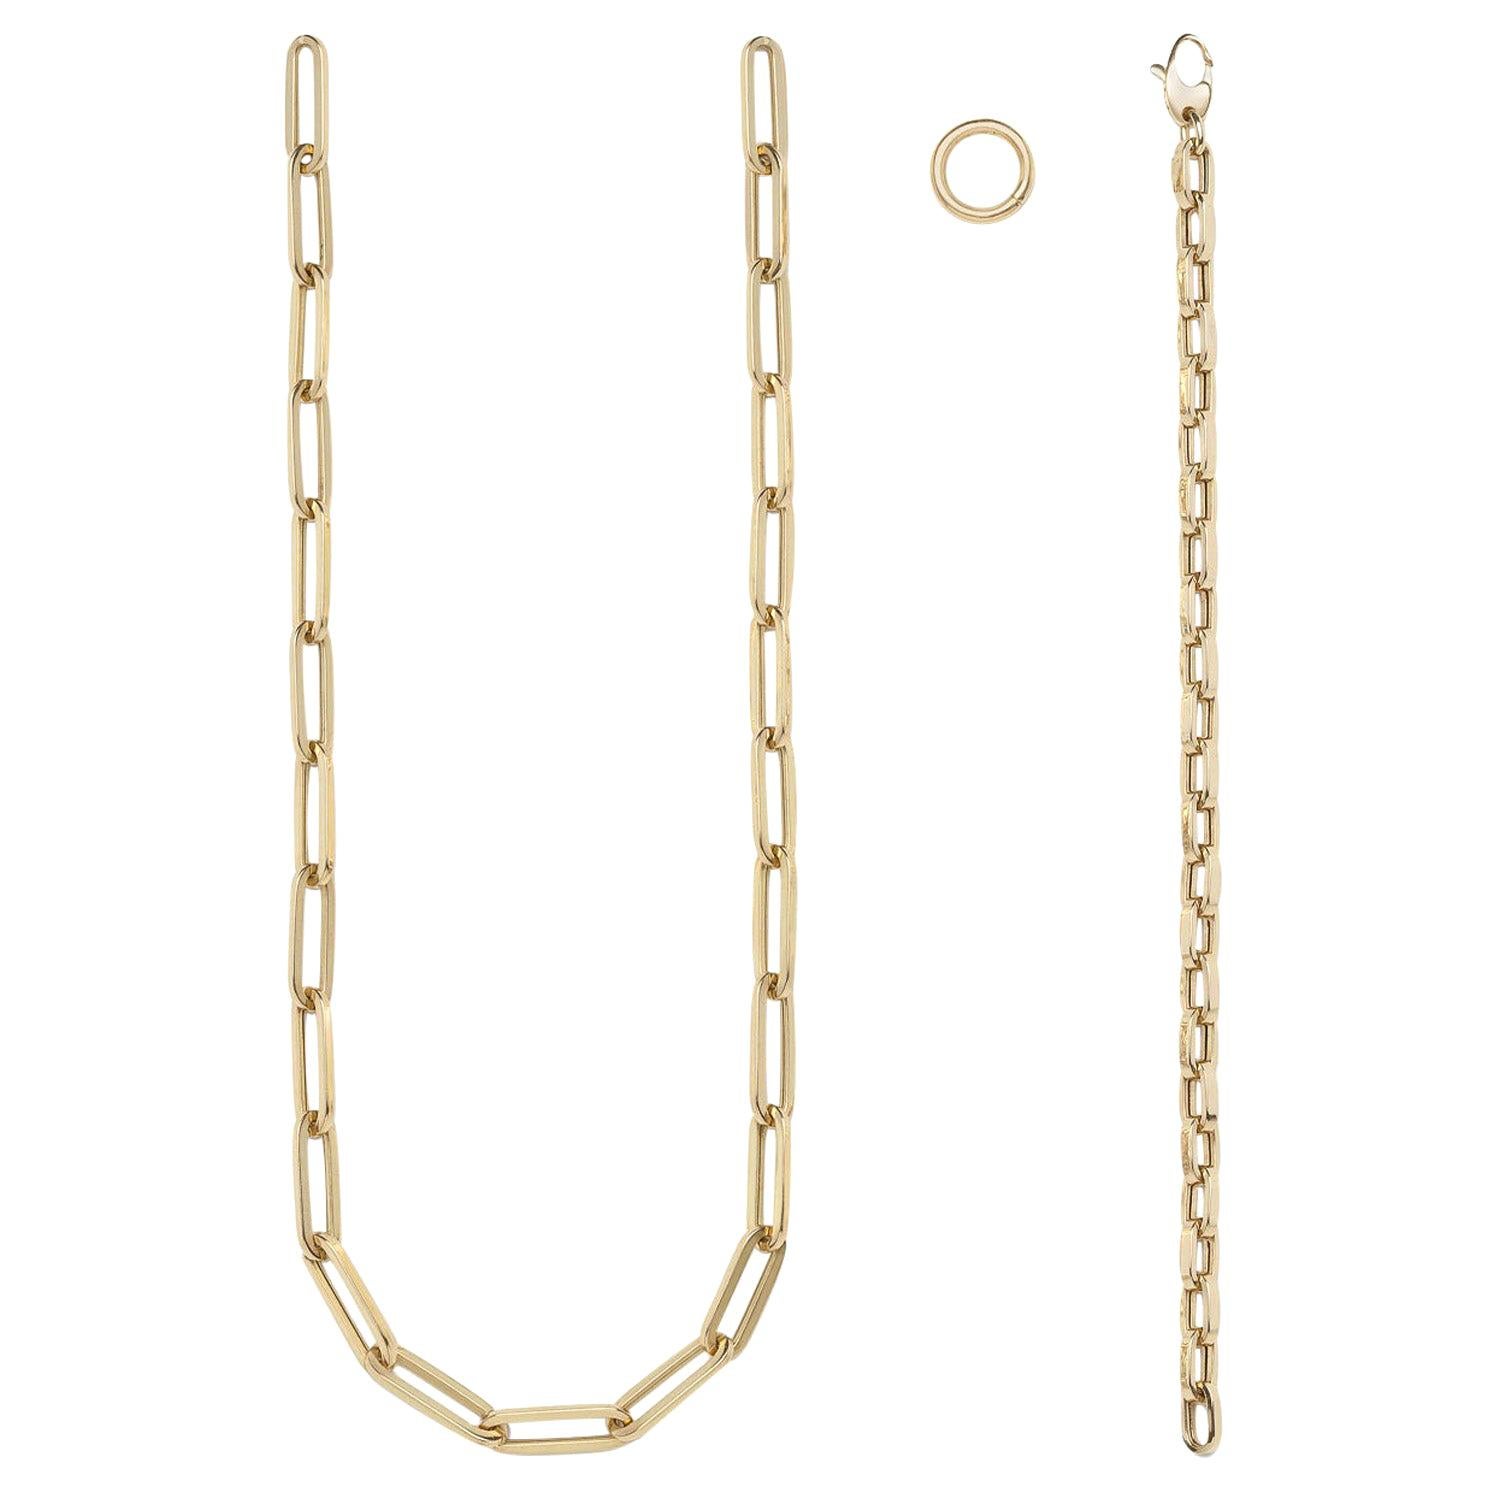 Leonie 4-in-1 Convertible Necklace and Bracelet Chain in Yellow Gold For Sale